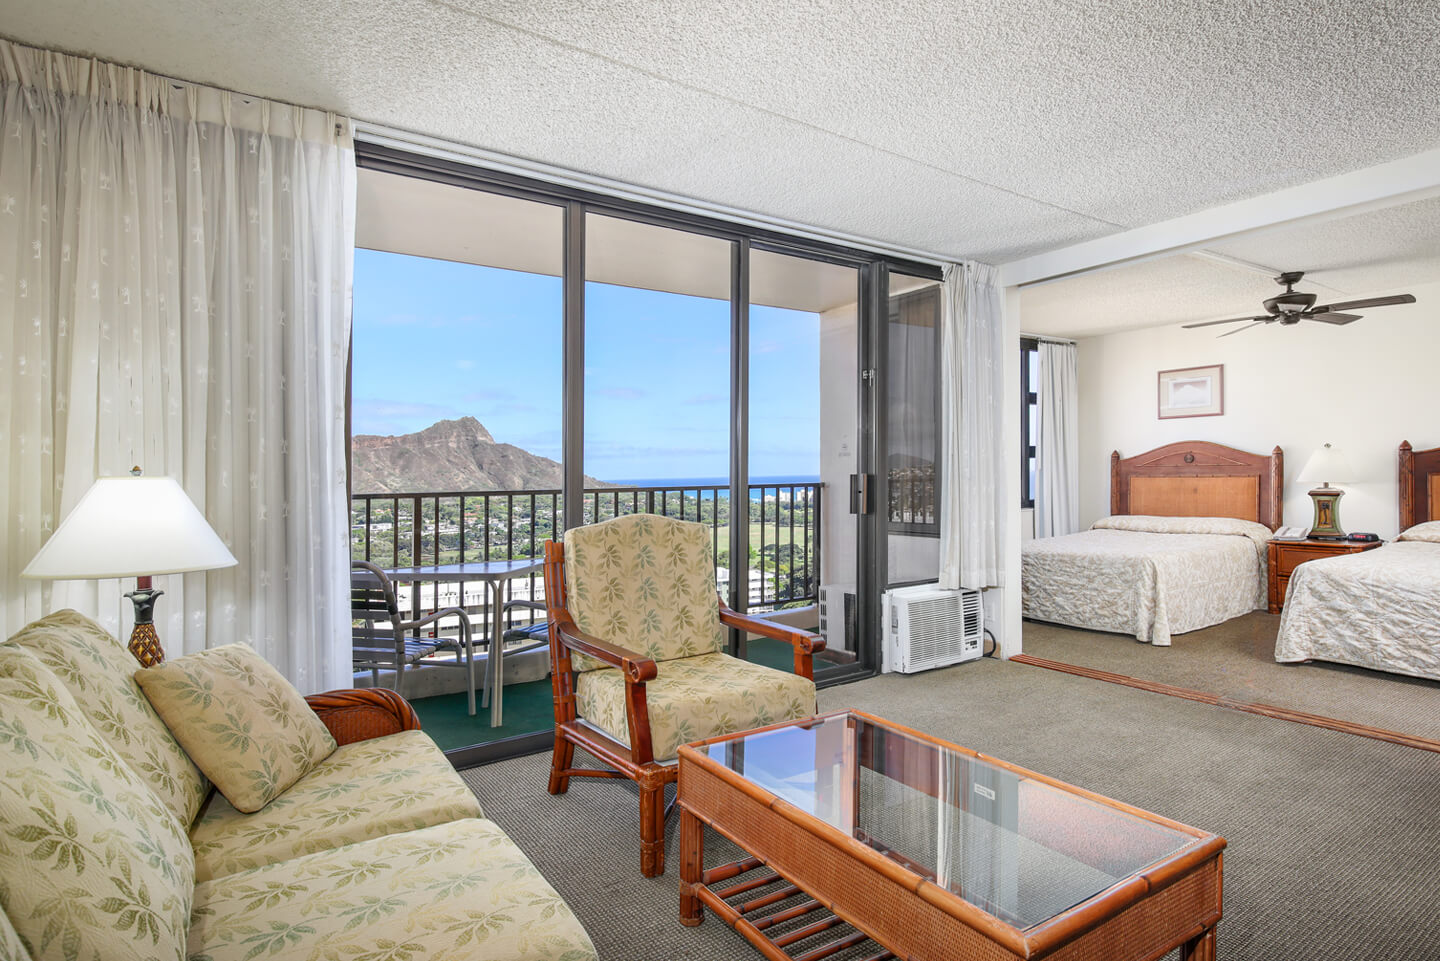 1-Bedroom Deluxe Ocean View living area, separate bedroom, and private balcony.